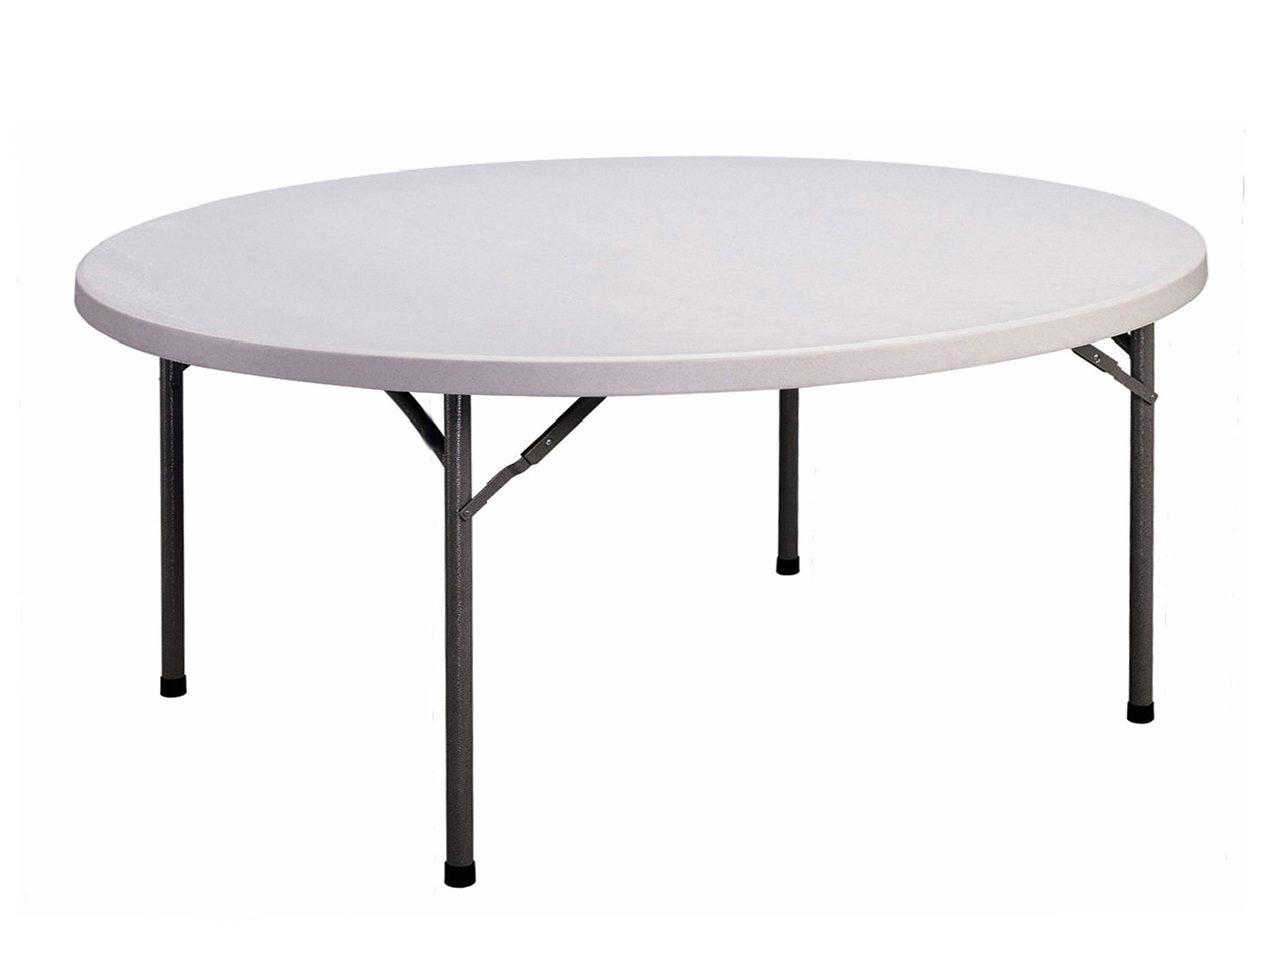 Correll CP72 CP Series Blow Molded Plastic Light Weight Economy Round Folding Table - 71 inch Round